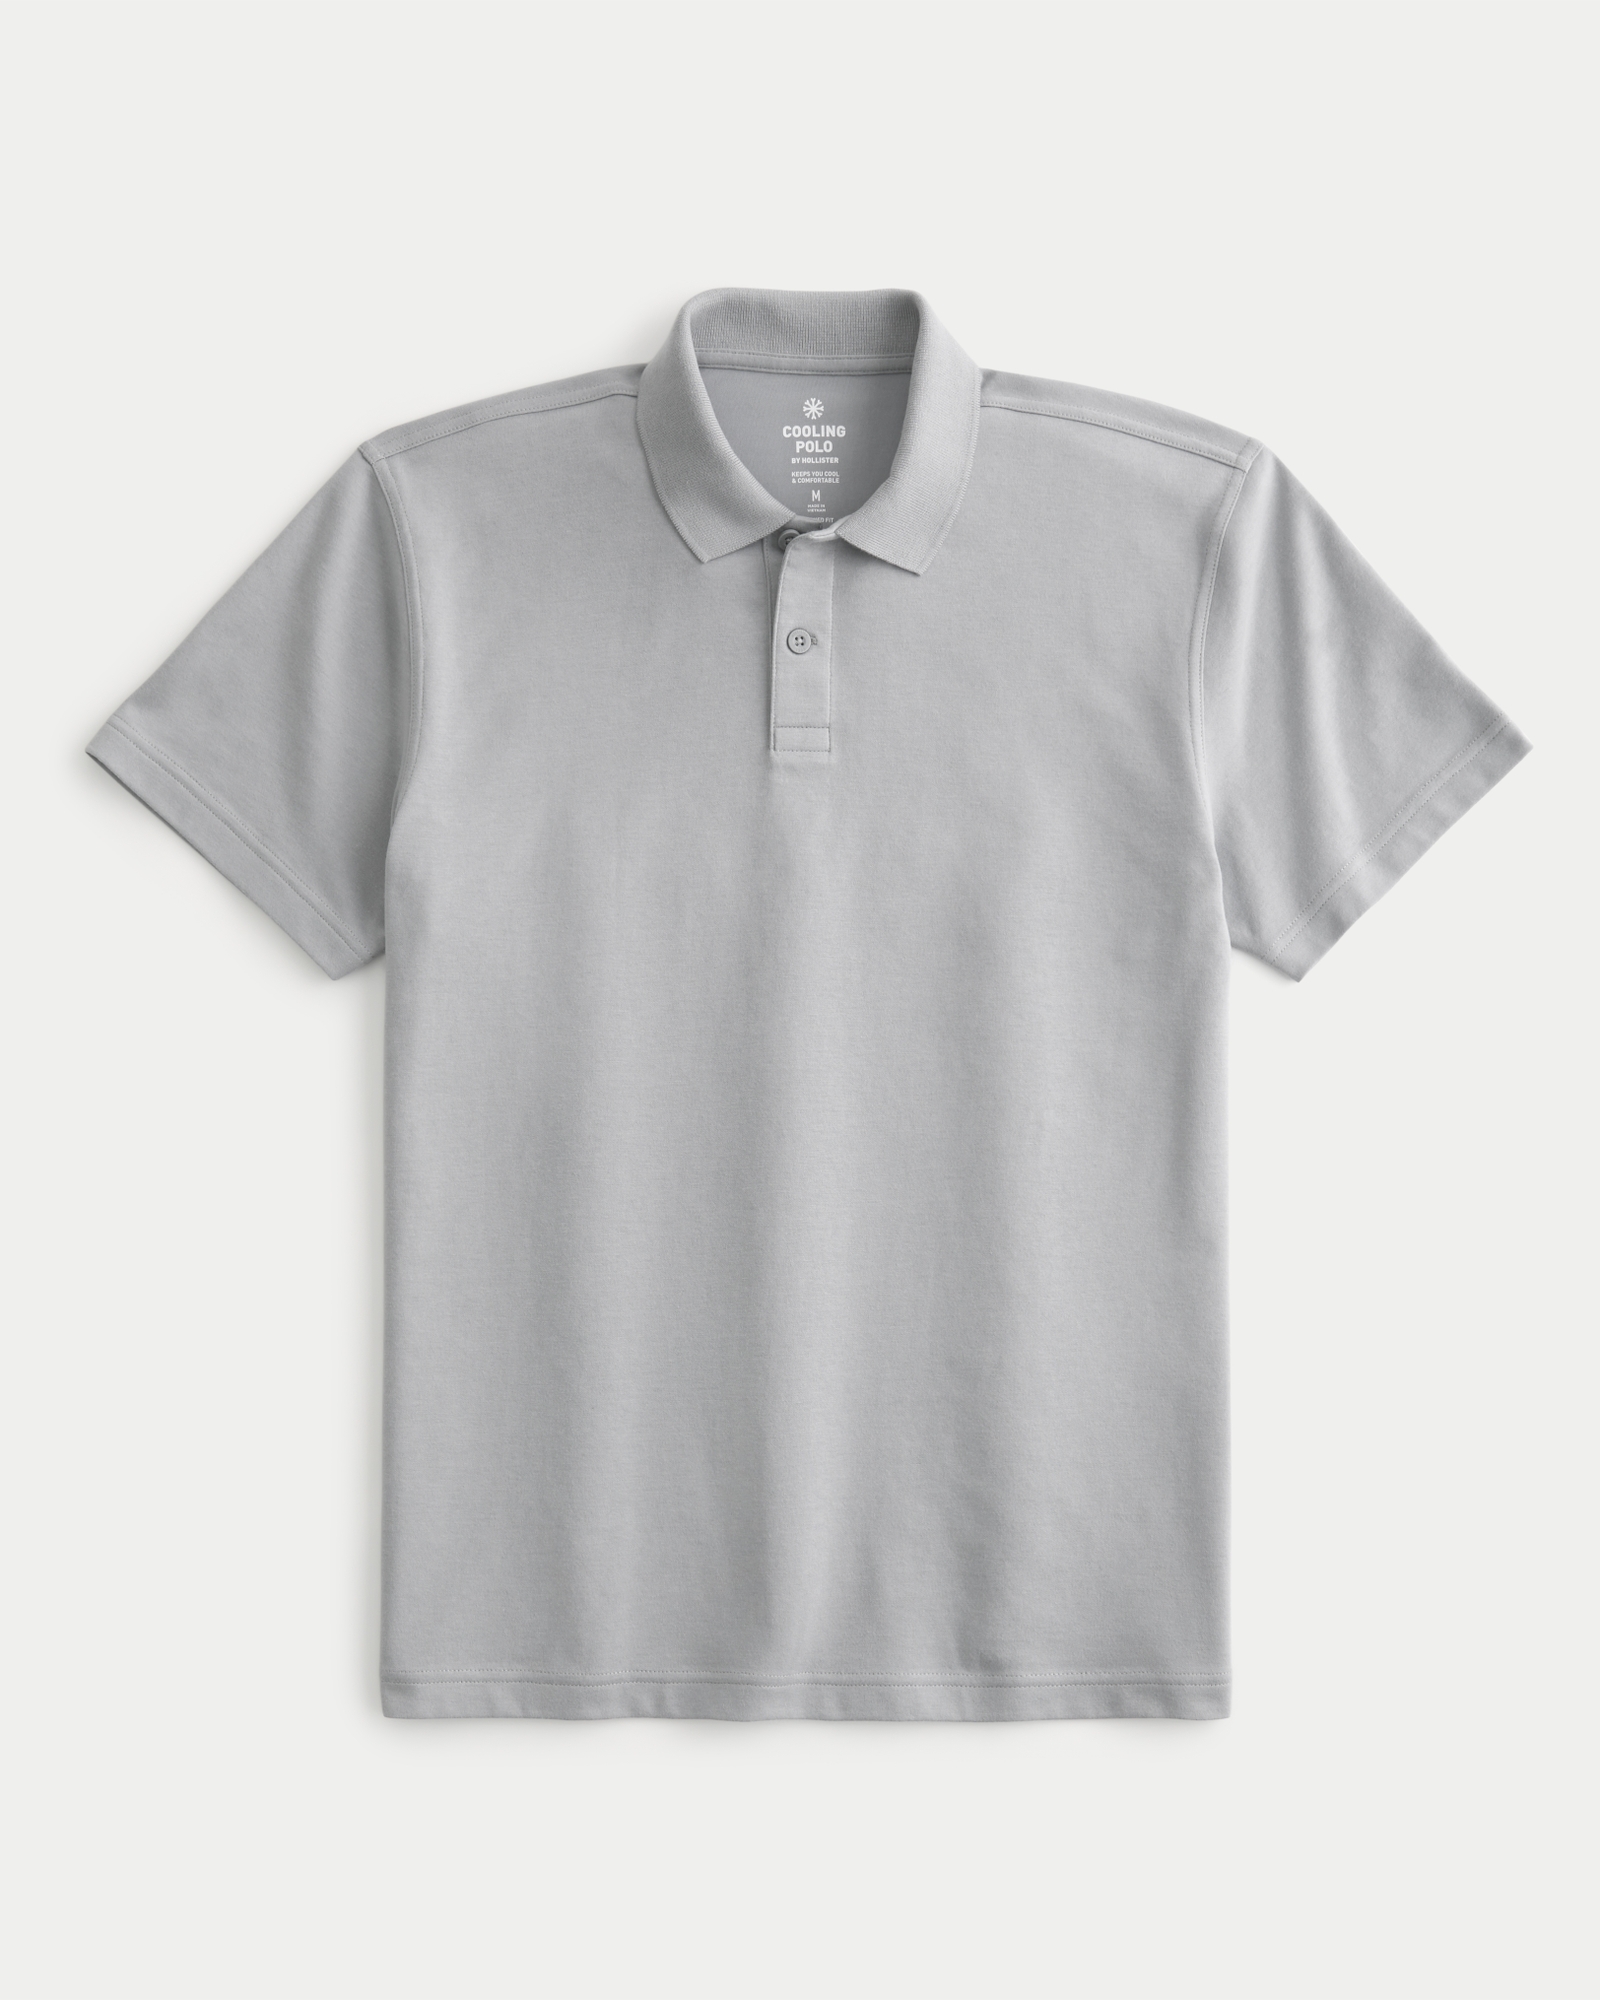 Men's Relaxed Cooling Polo, Men's Tops